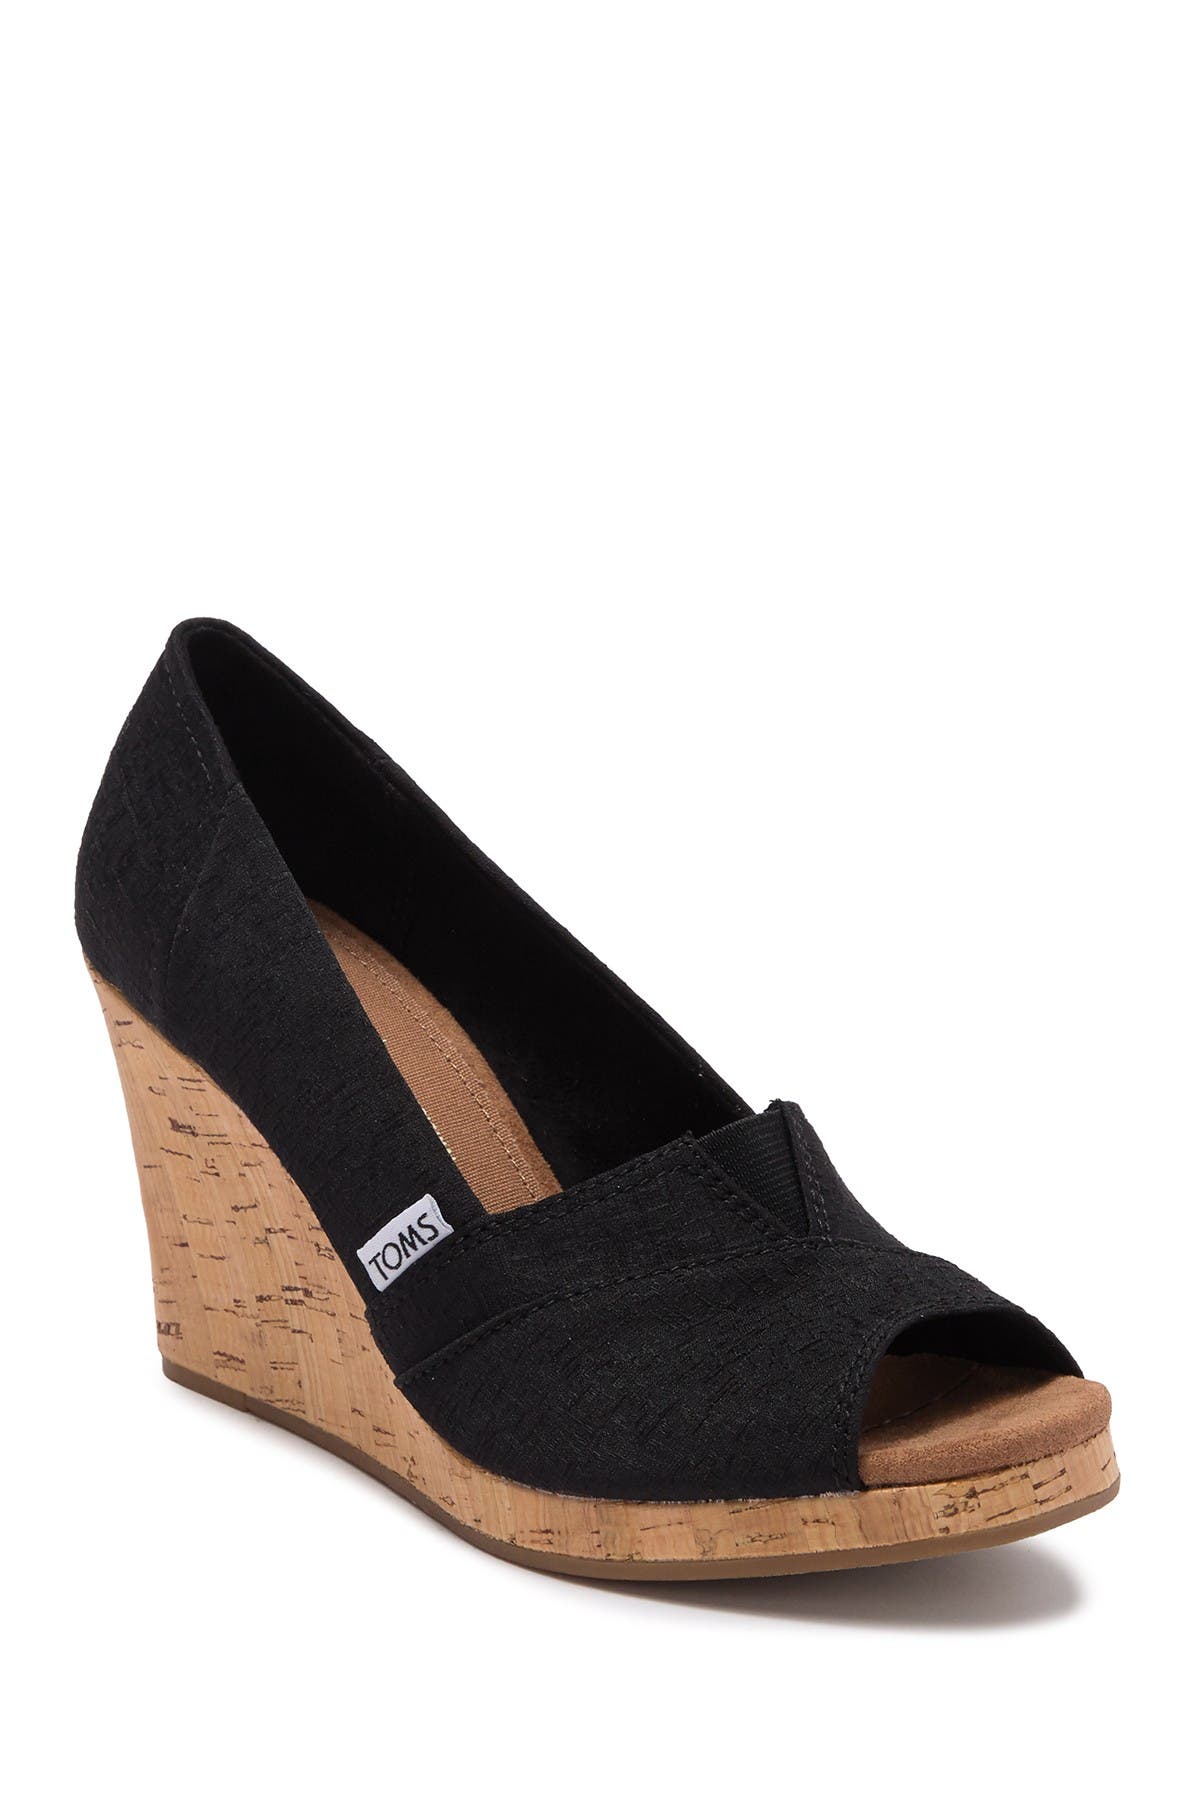 TOMS | Classic Wedge Sandal | Nordstrom 